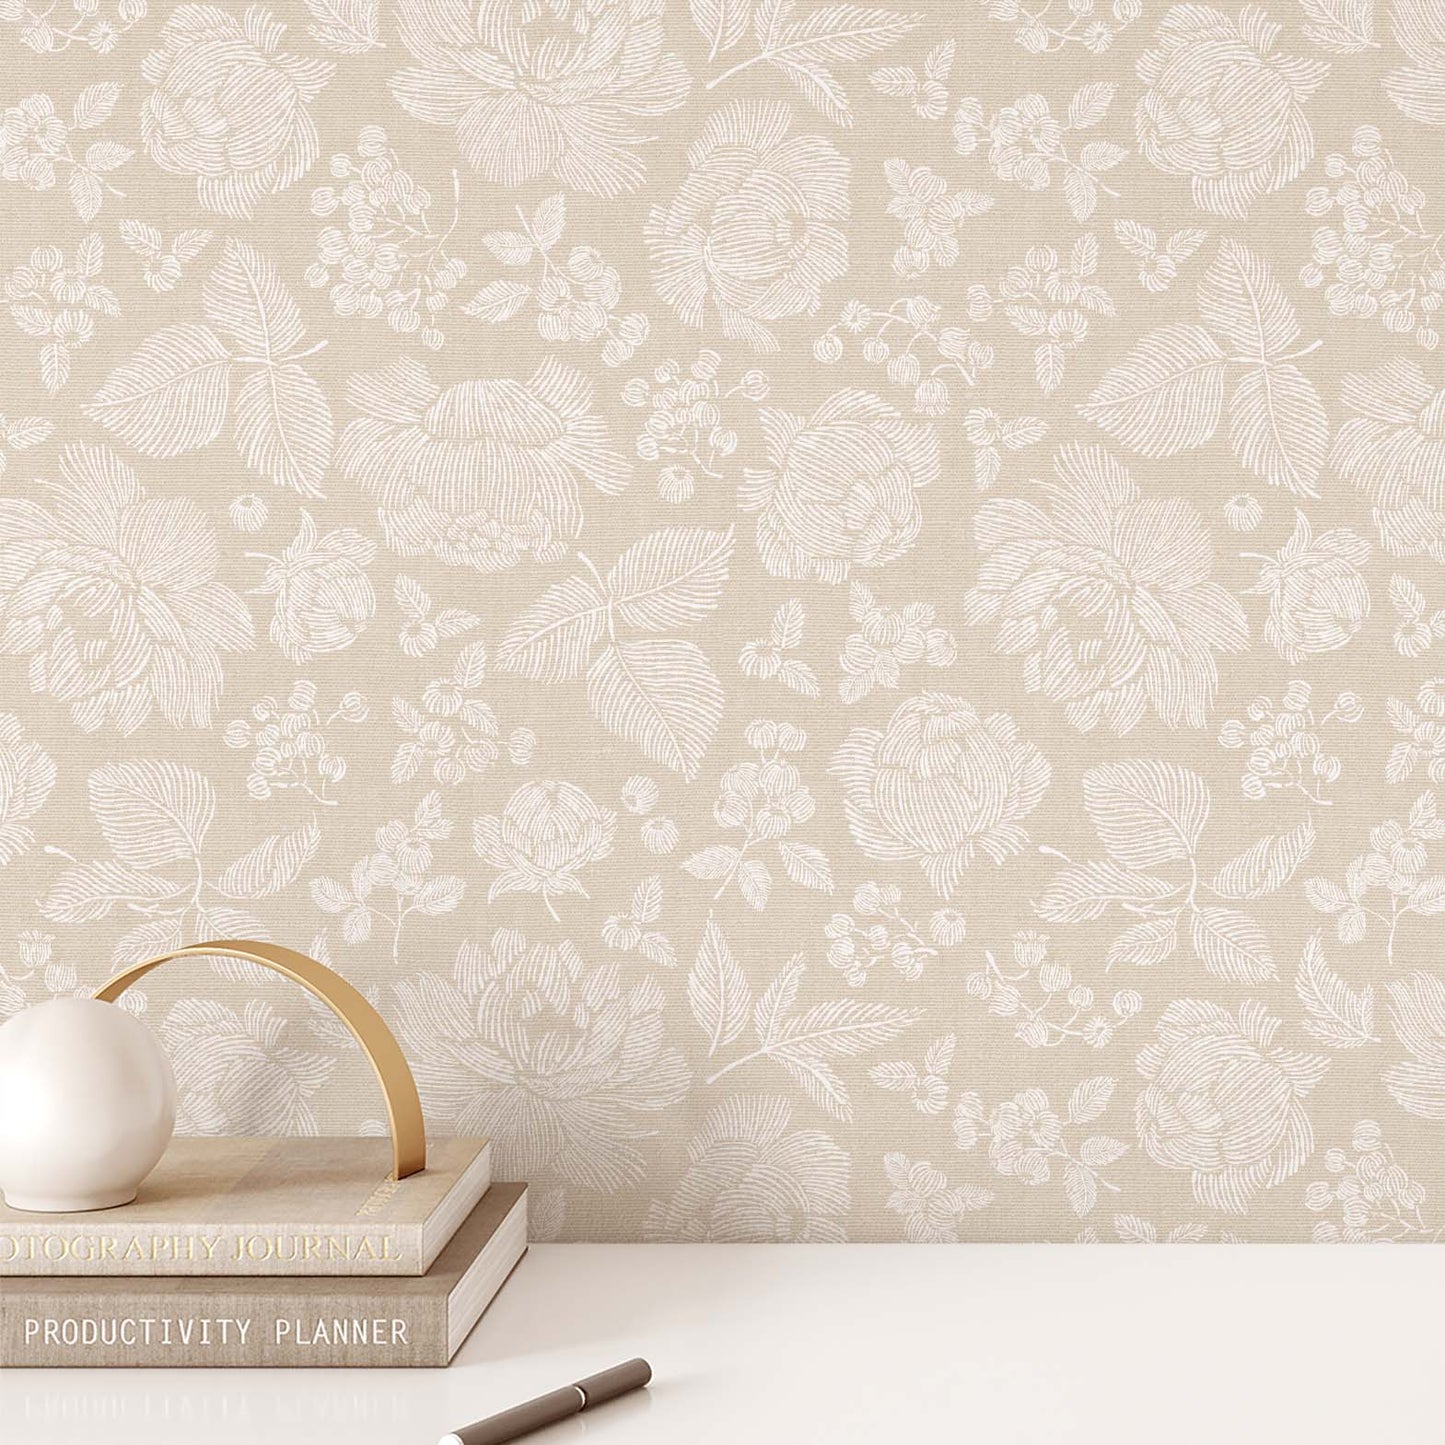 Line Peonies and Berries Wallpaper - White on Tan